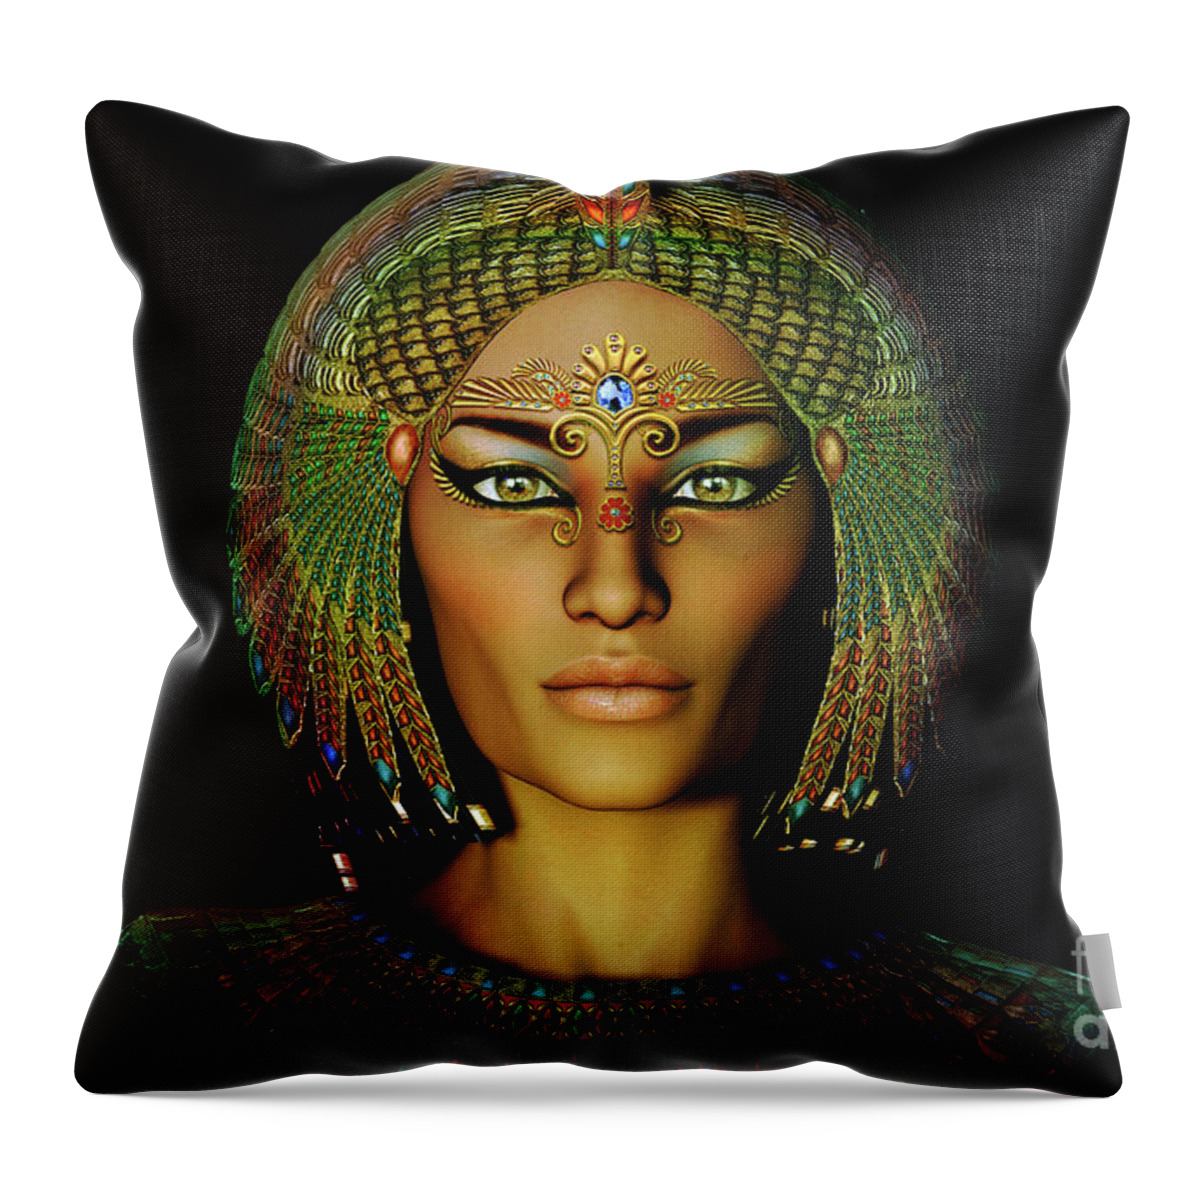 Queen Throw Pillow featuring the digital art Queen Of The Nile by Shadowlea Is